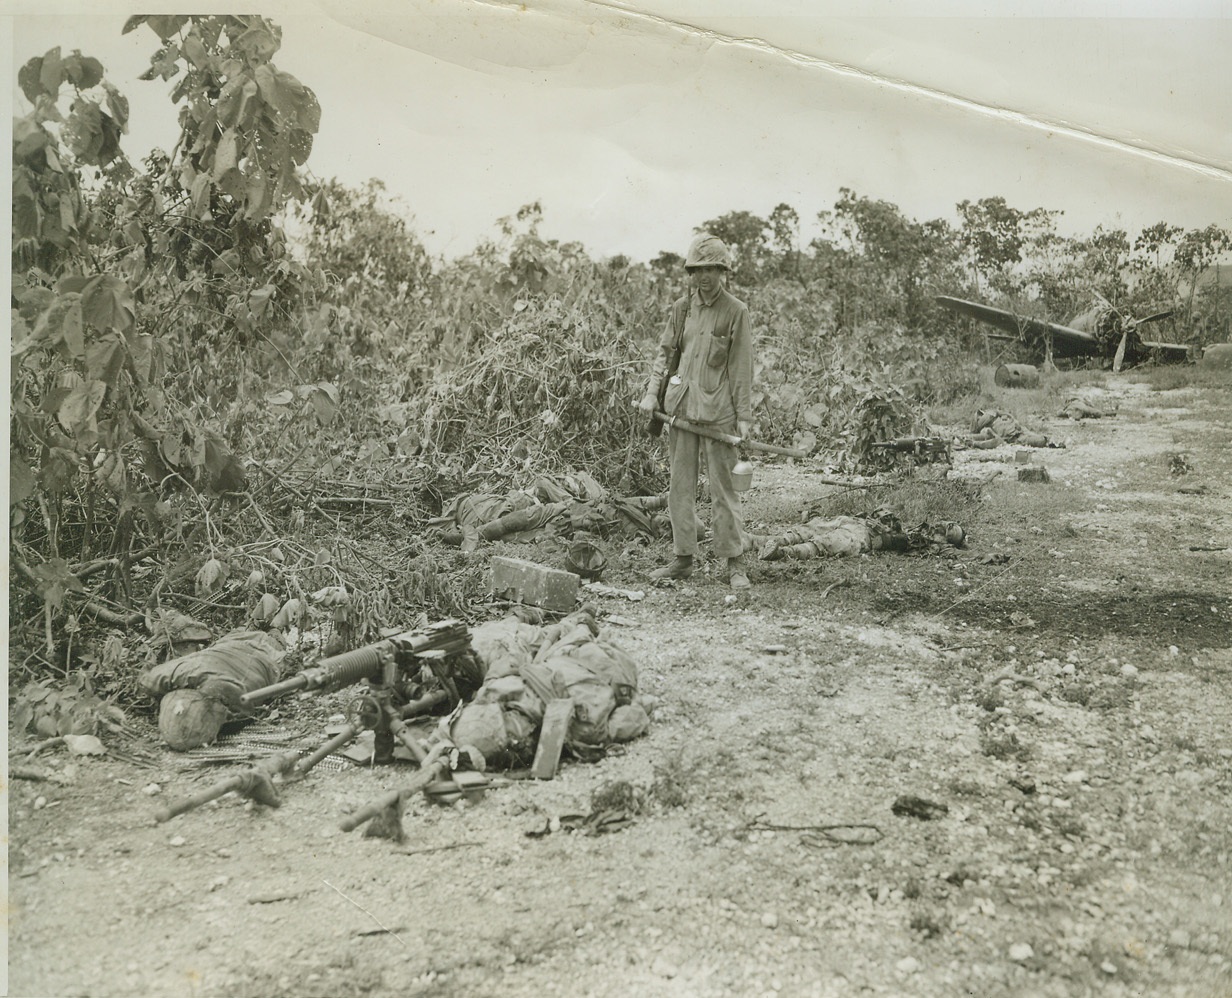 DEATH WAS THEIR SOUVENIR, 9/22/1944. PELELIU ISLAND, PALAU – Holding a Jap sword, his pockets bulging with other souvenirs of the battle for Peleliu Island, a Yank leatherneck looks at the bodies of Japs whose only souvenir was death. Two enemy machine gunners, slain in the first moments of the invasion, lie in the foreground. The Jap behind the Marine committed suicide by holding a grenade to his chest. Note wrecked plane in background. Photo by Stanley Troutman, ACME photographer for the War Picture Pool. Credit: ACME;